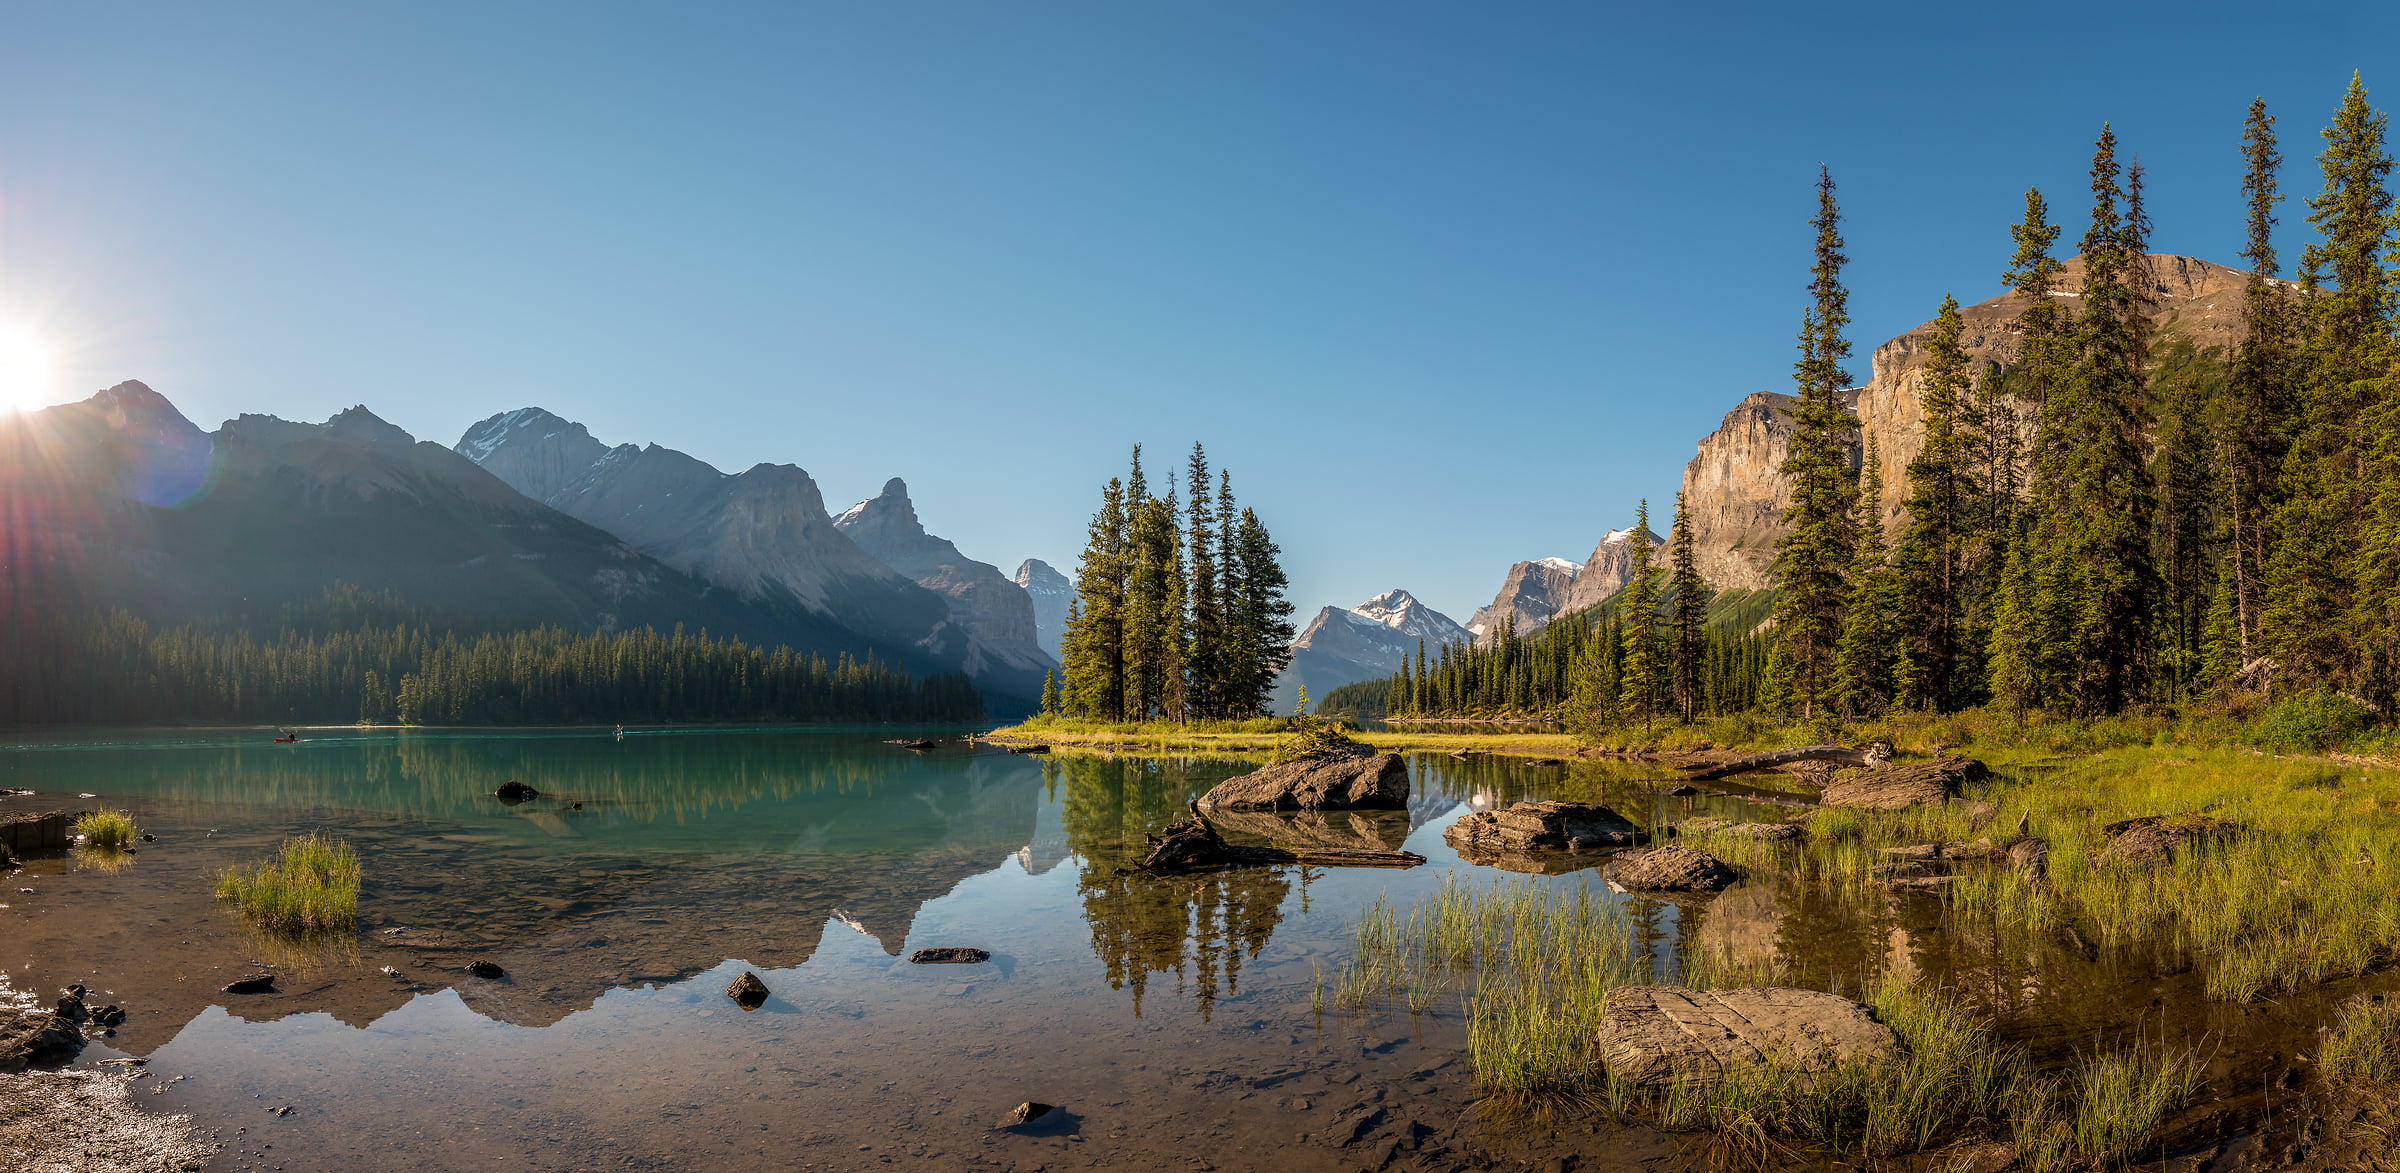 170 megapixels! A very high resolution, large-format VAST photo print of Maligne Lake, Jasper National Park, Canada; nature landscape photo created by Tim Shields.